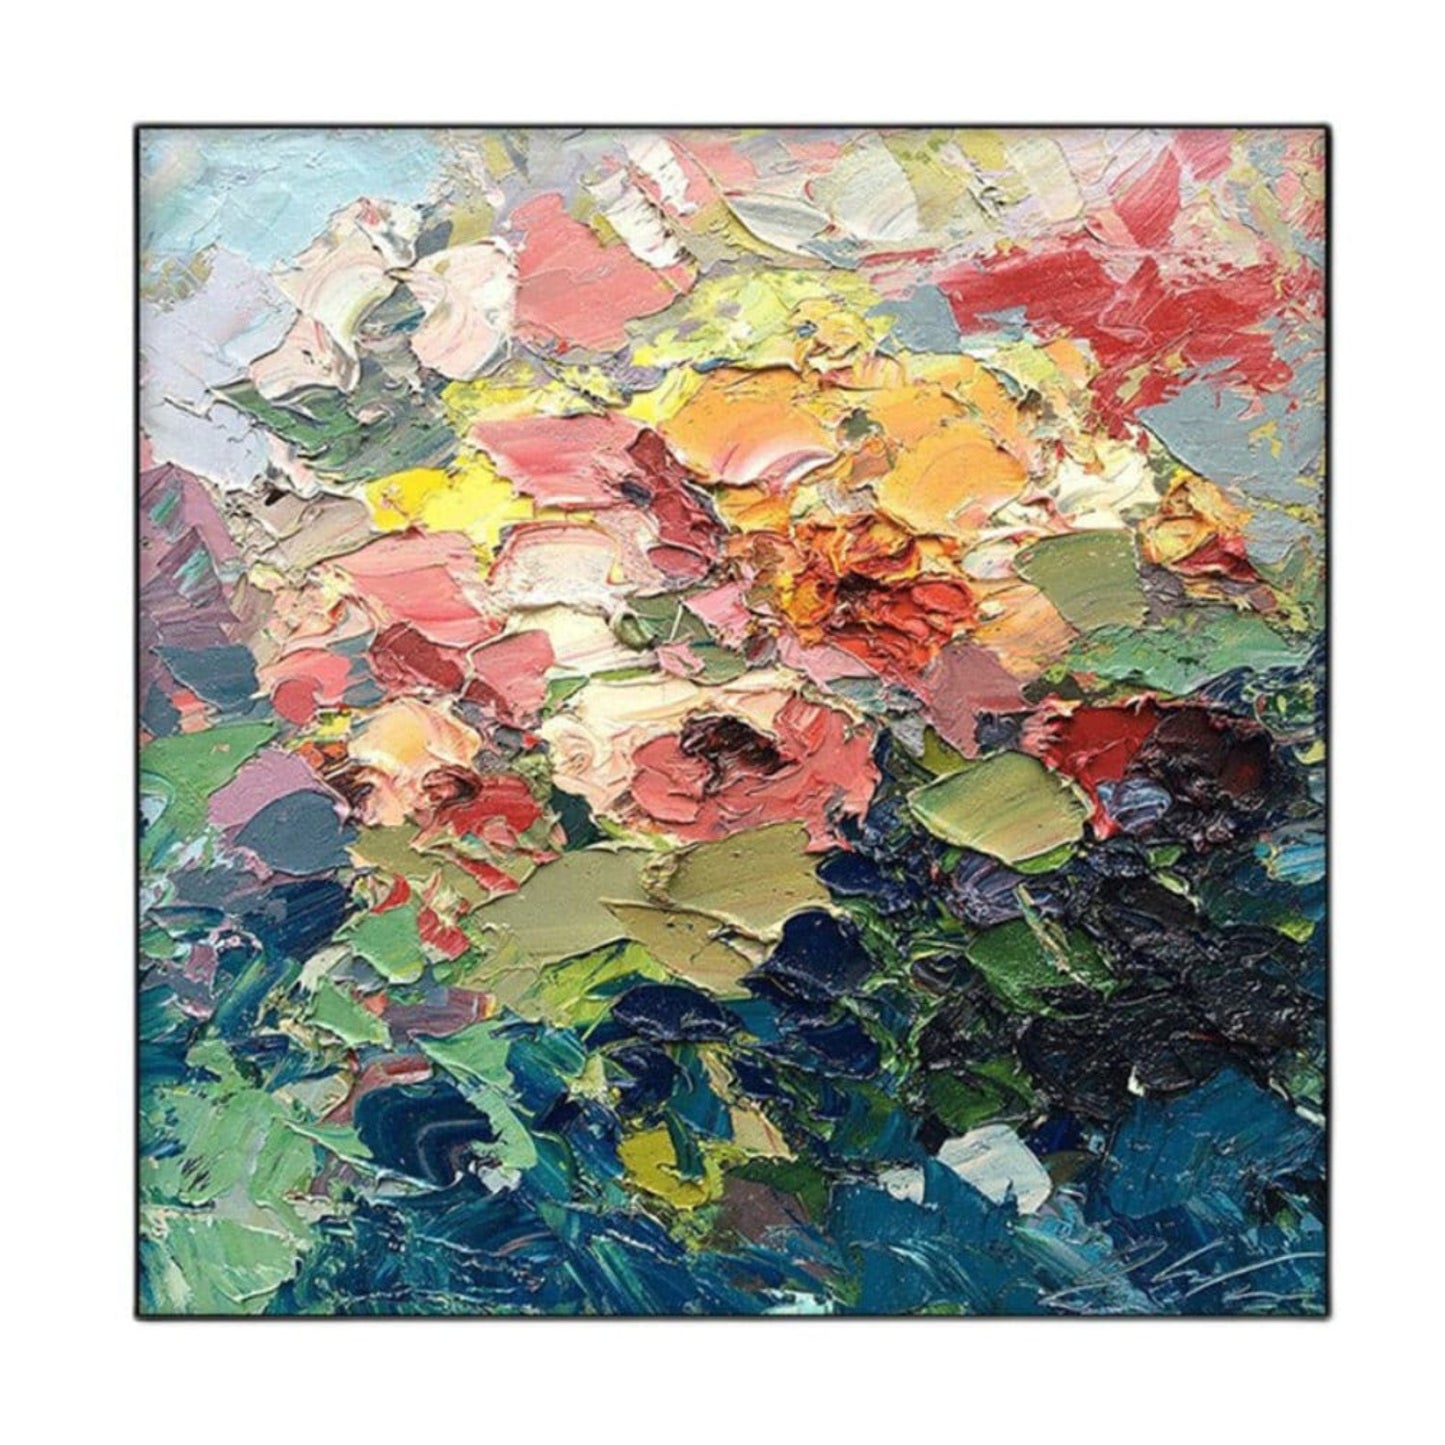 3D Palette Knife 100% Hand Painted Floral Wall Art